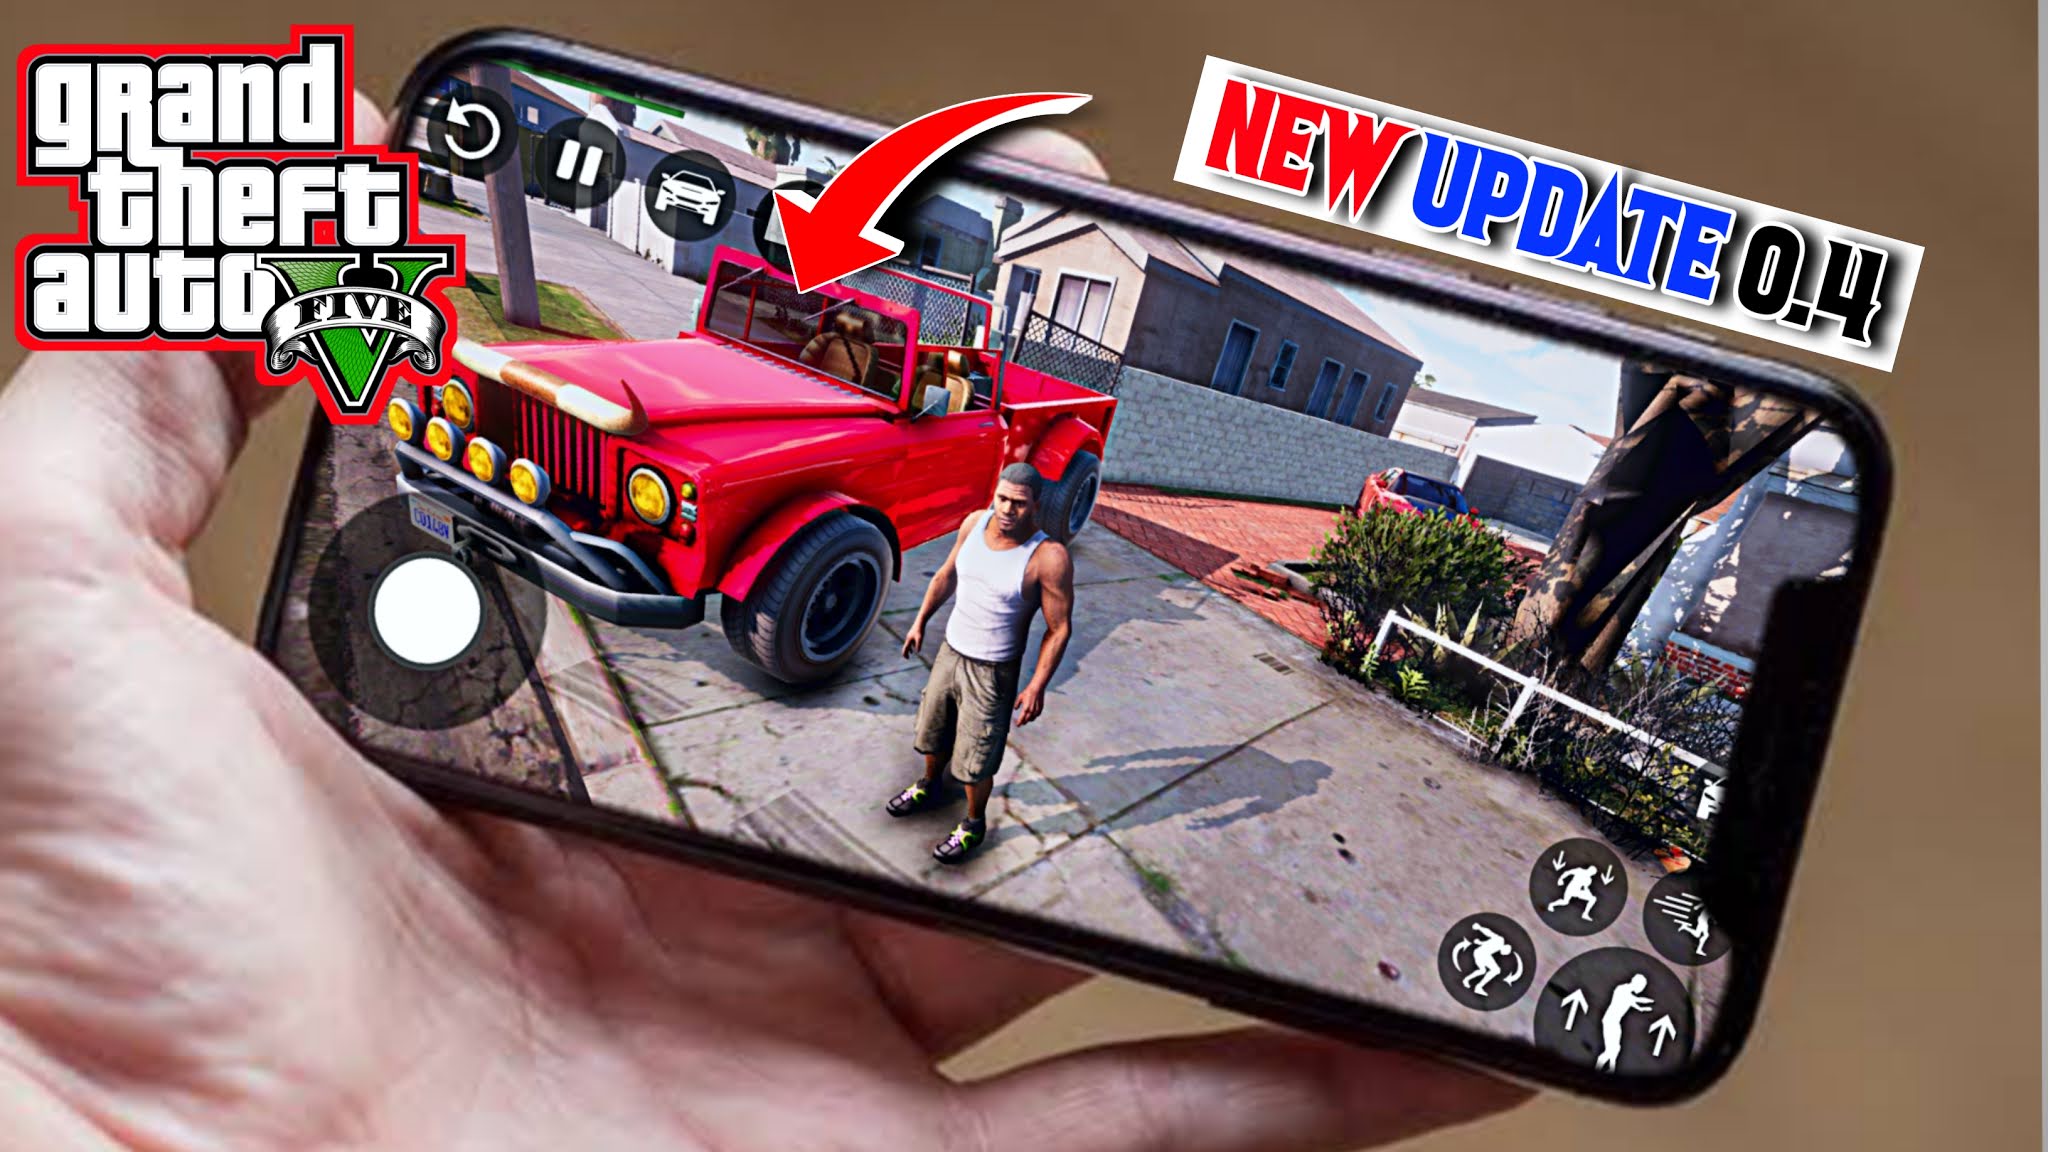 GTA online mode for android - gta 5 online app for android - Techy Bag